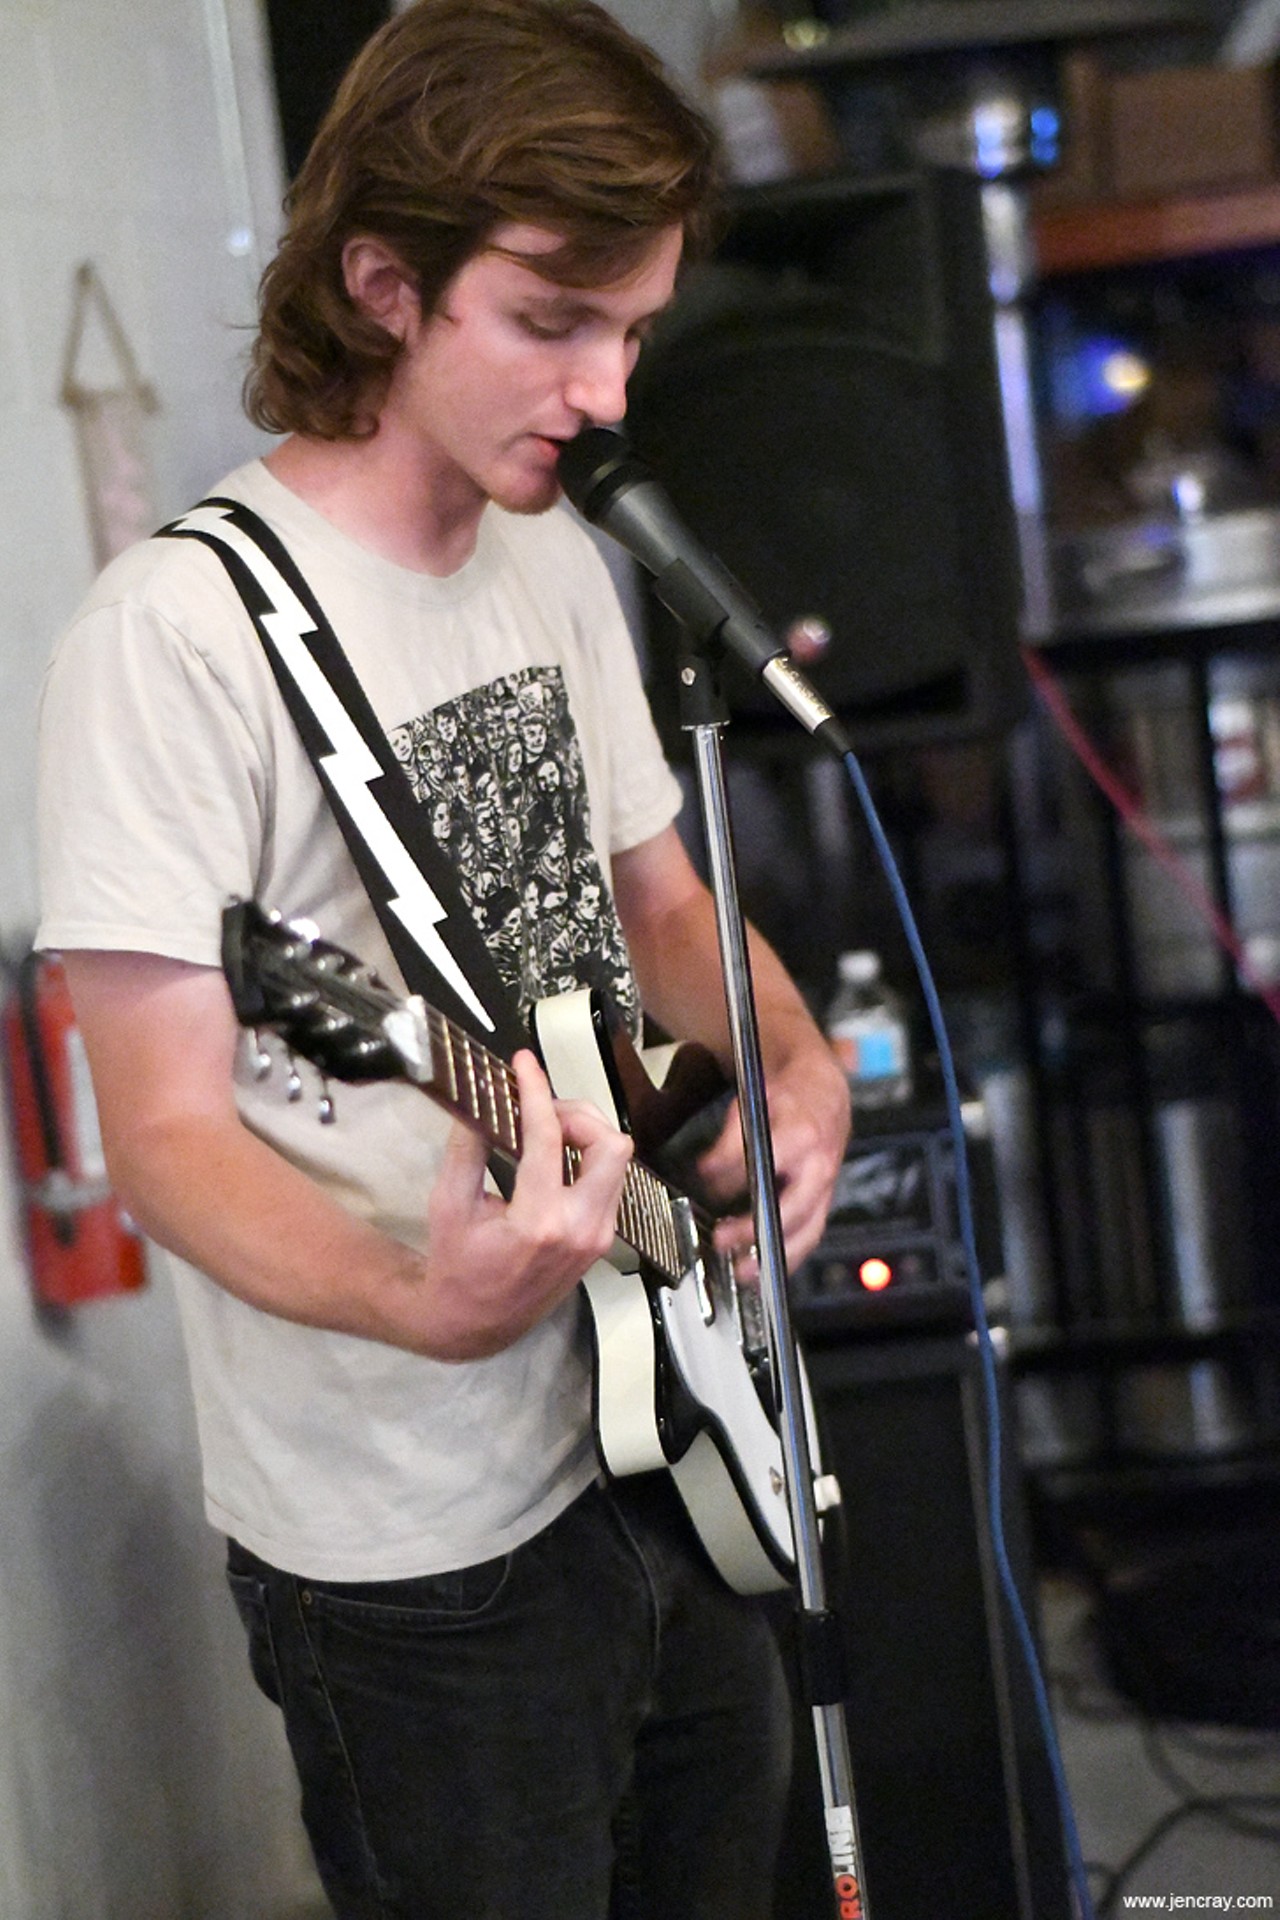 Photos from Tall Juan, Sonic Graffiti and mtvh1n1 at Deadly Sins Brewing